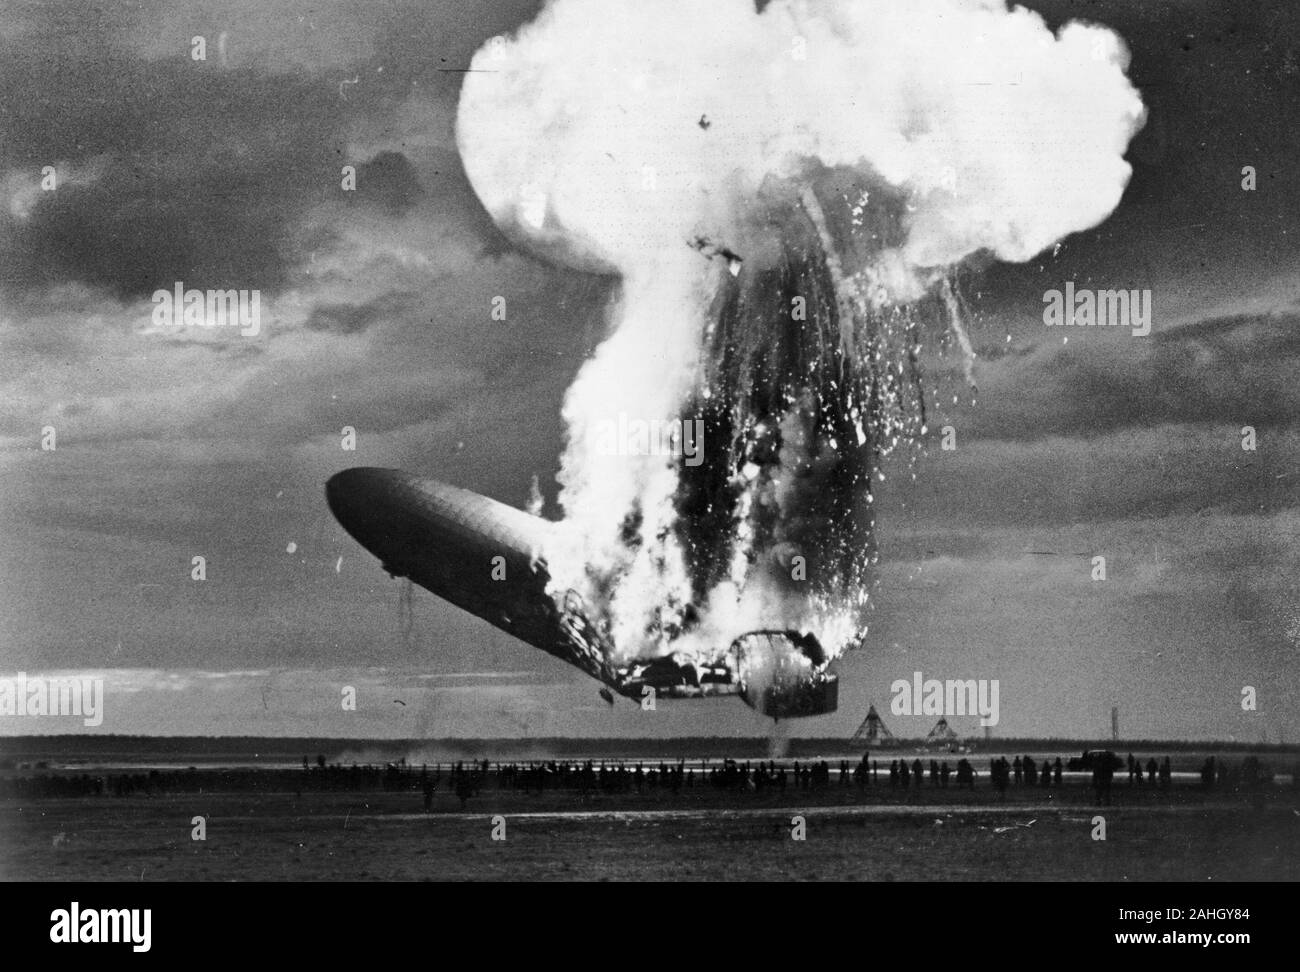 Download Left Side View Of German Airship Zeppelin Lz 129 Hindenburg Burning At Lakehurst New Jersey 6 May 1937 The Disaster Occured While The Airship Was Landing In This Photo The Rear Half